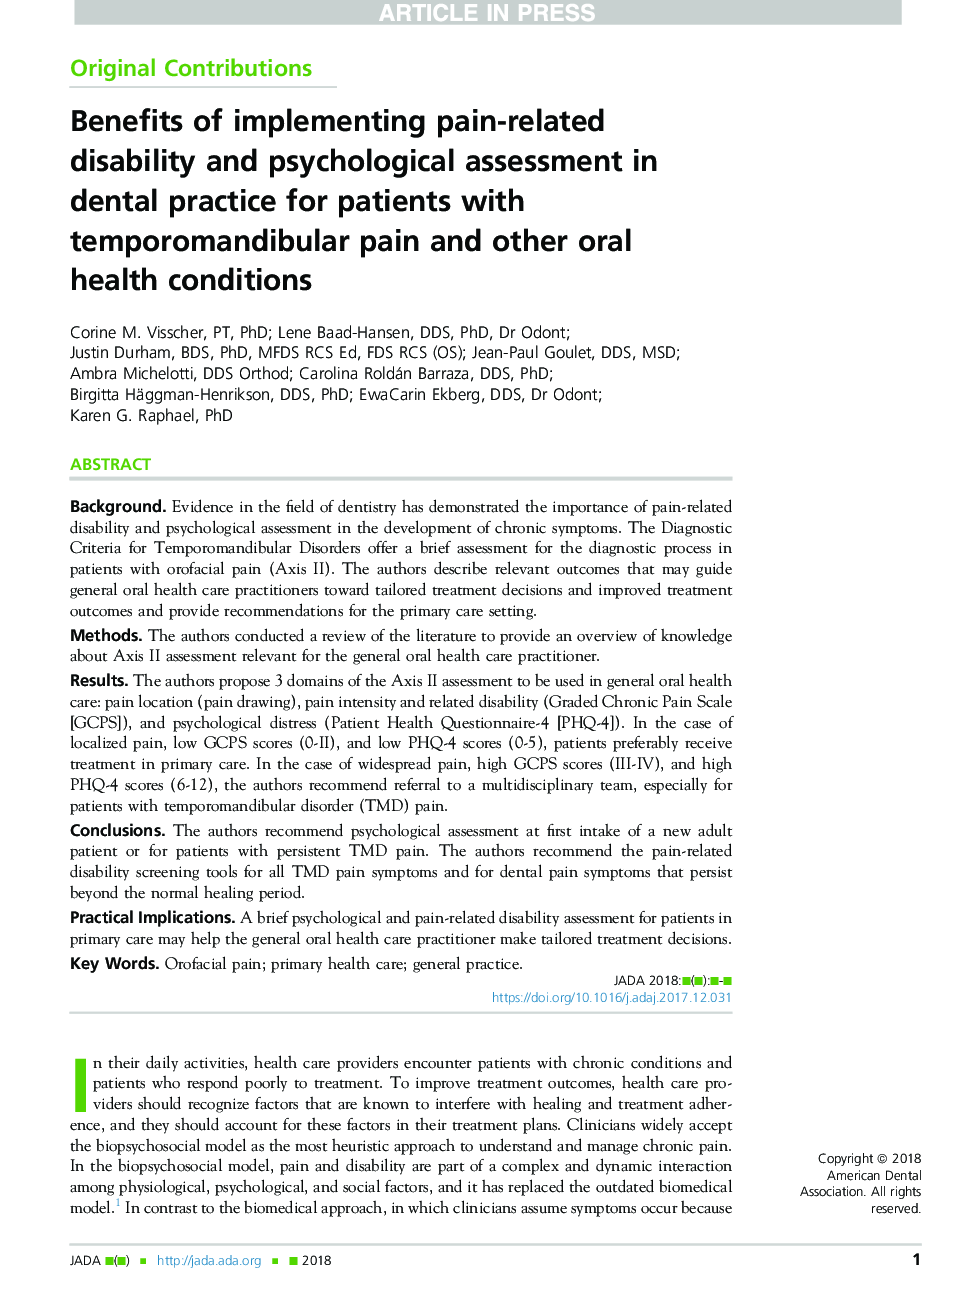 Benefits of implementing pain-related disability and psychological assessment in dental practice for patients with temporomandibular pain and other oral health conditions